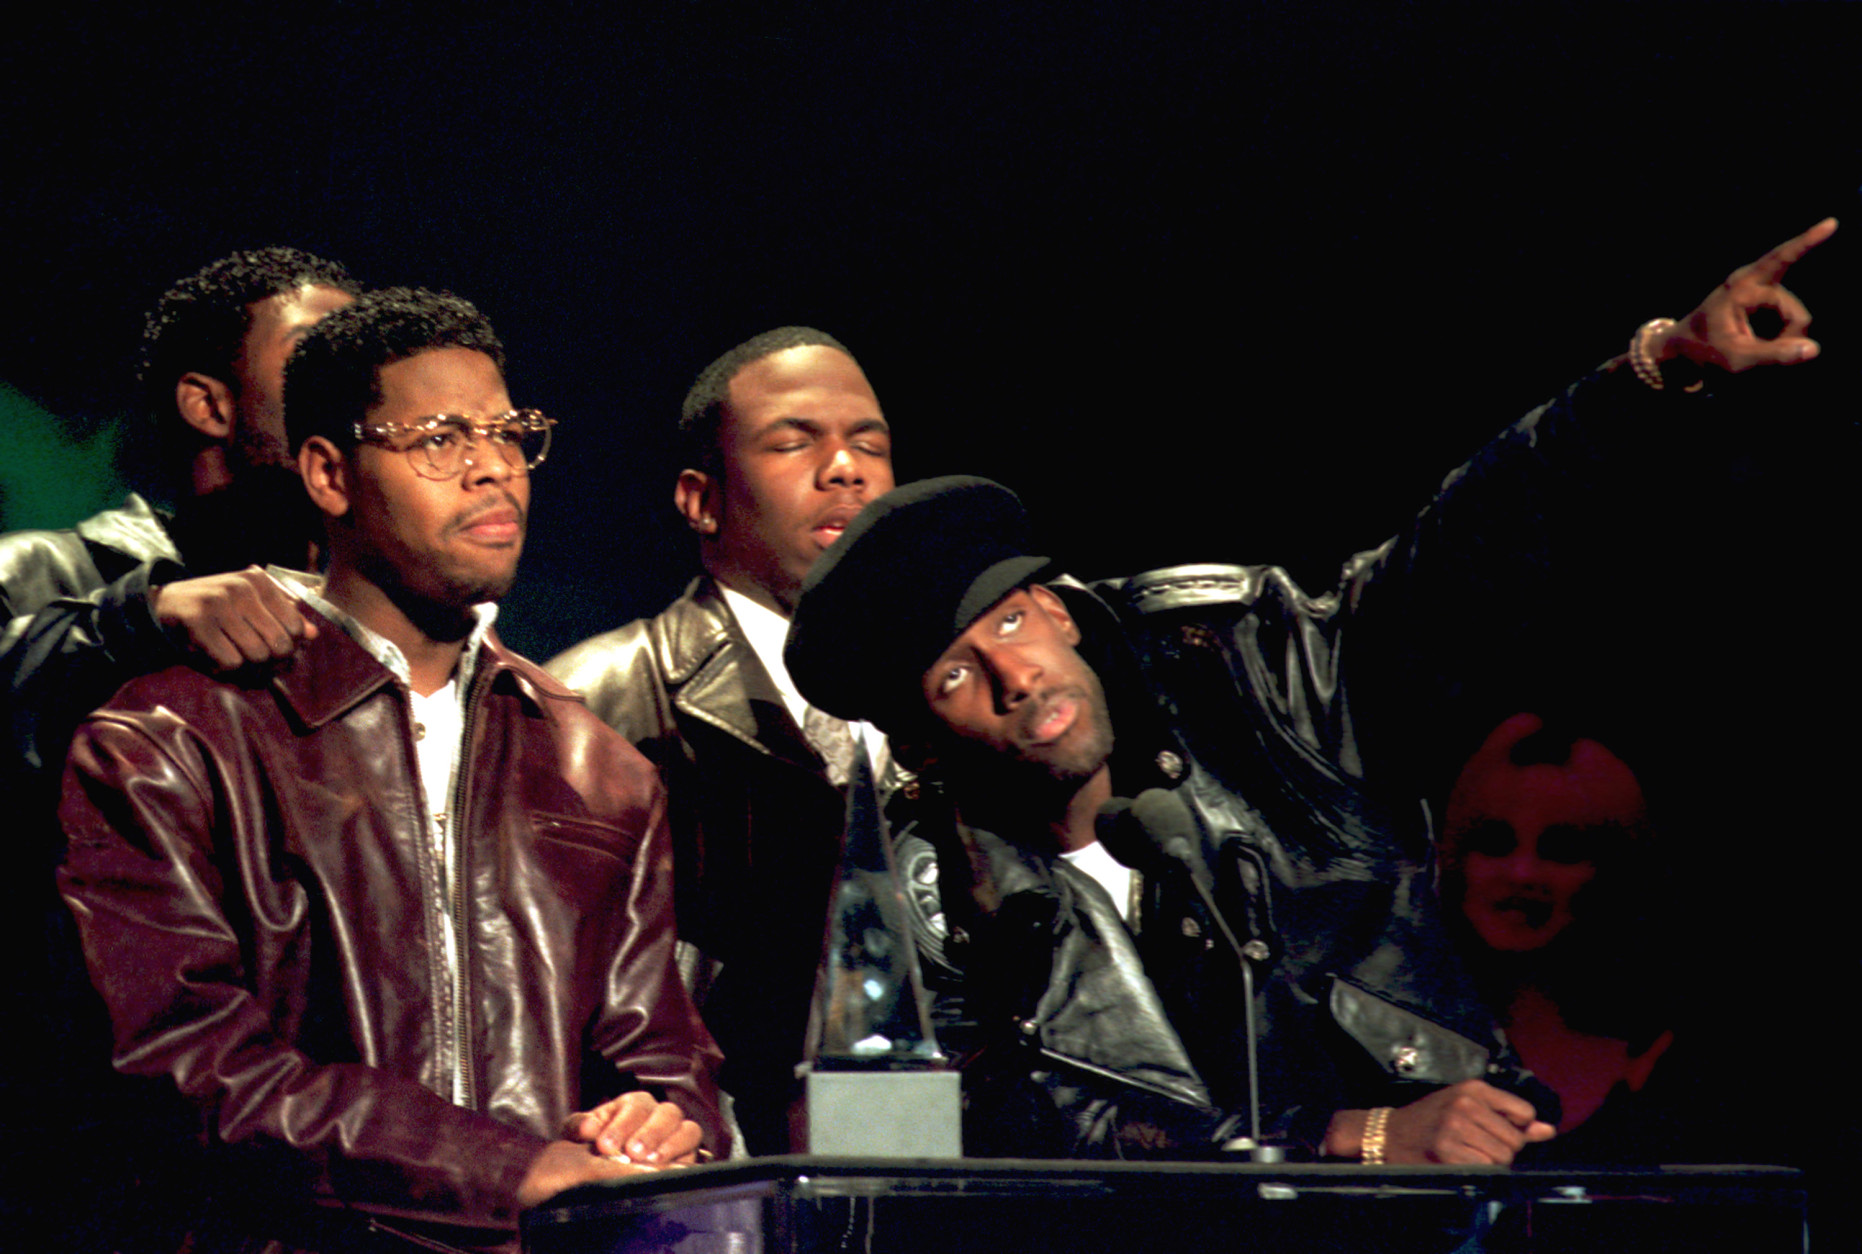 Members of the group Boyz II Men accept their award at the 22nd annual American Music Awards in Los Angeles, Ca., Monday, Jan. 30, 1995.  The group's hit single "I'll Make Love To You" won in the categories of pop-rock and soul-rhythm and blues.  The group was also given an award as the favorite group in the soul-rhythm and blues category.  The band members are, Michael McCary, Wanya Morris, Nate Morris and Shawn Stockman.  (AP Photo/Reed Saxon)